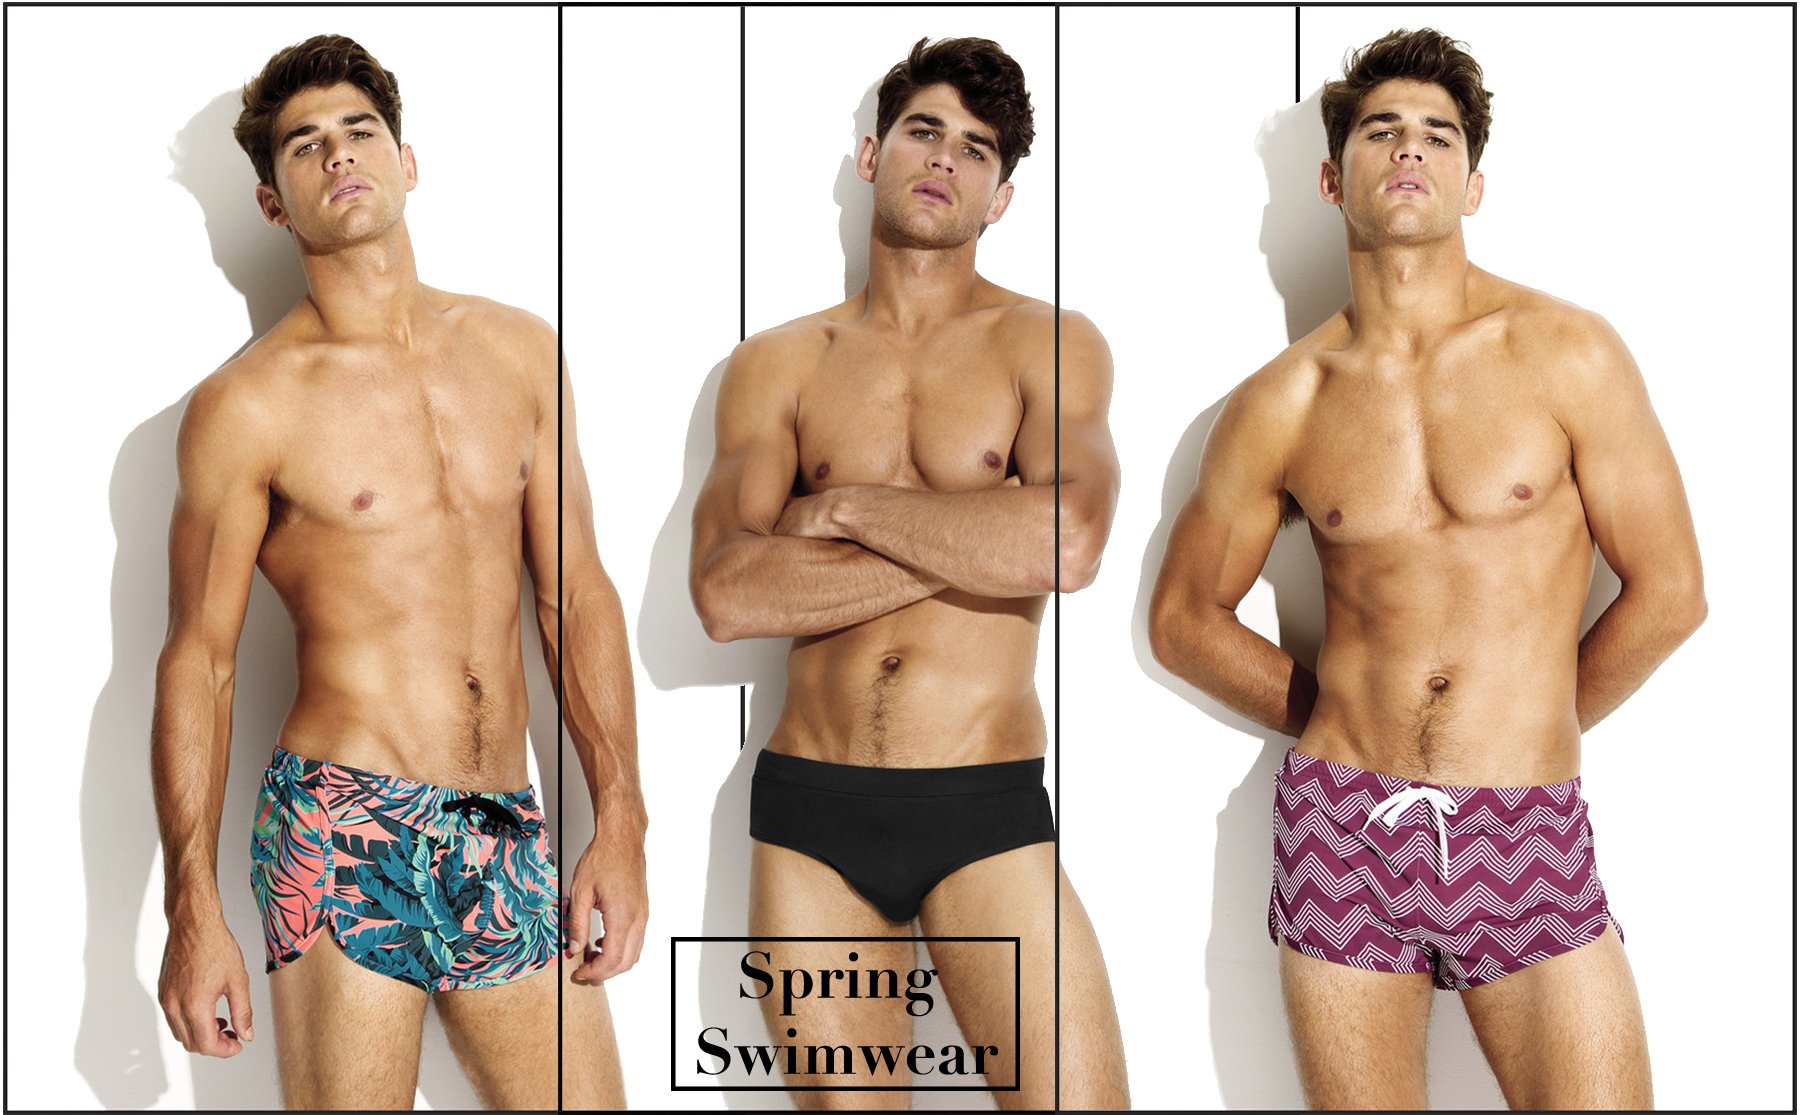 Charlie by MZ Spring Swimwear by The Kentucky Gent